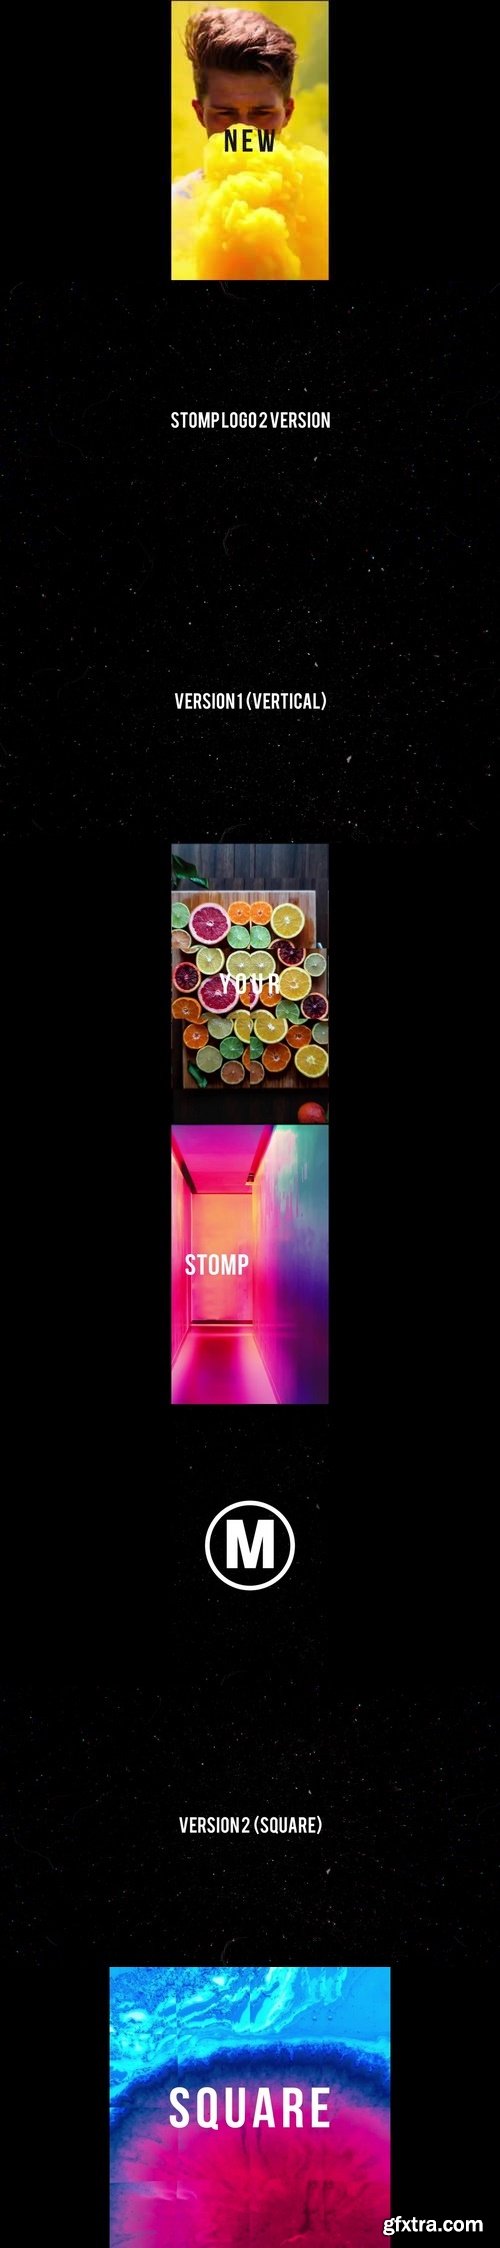 MA - Dynamic Stomp Logo After Effects Templates 56875